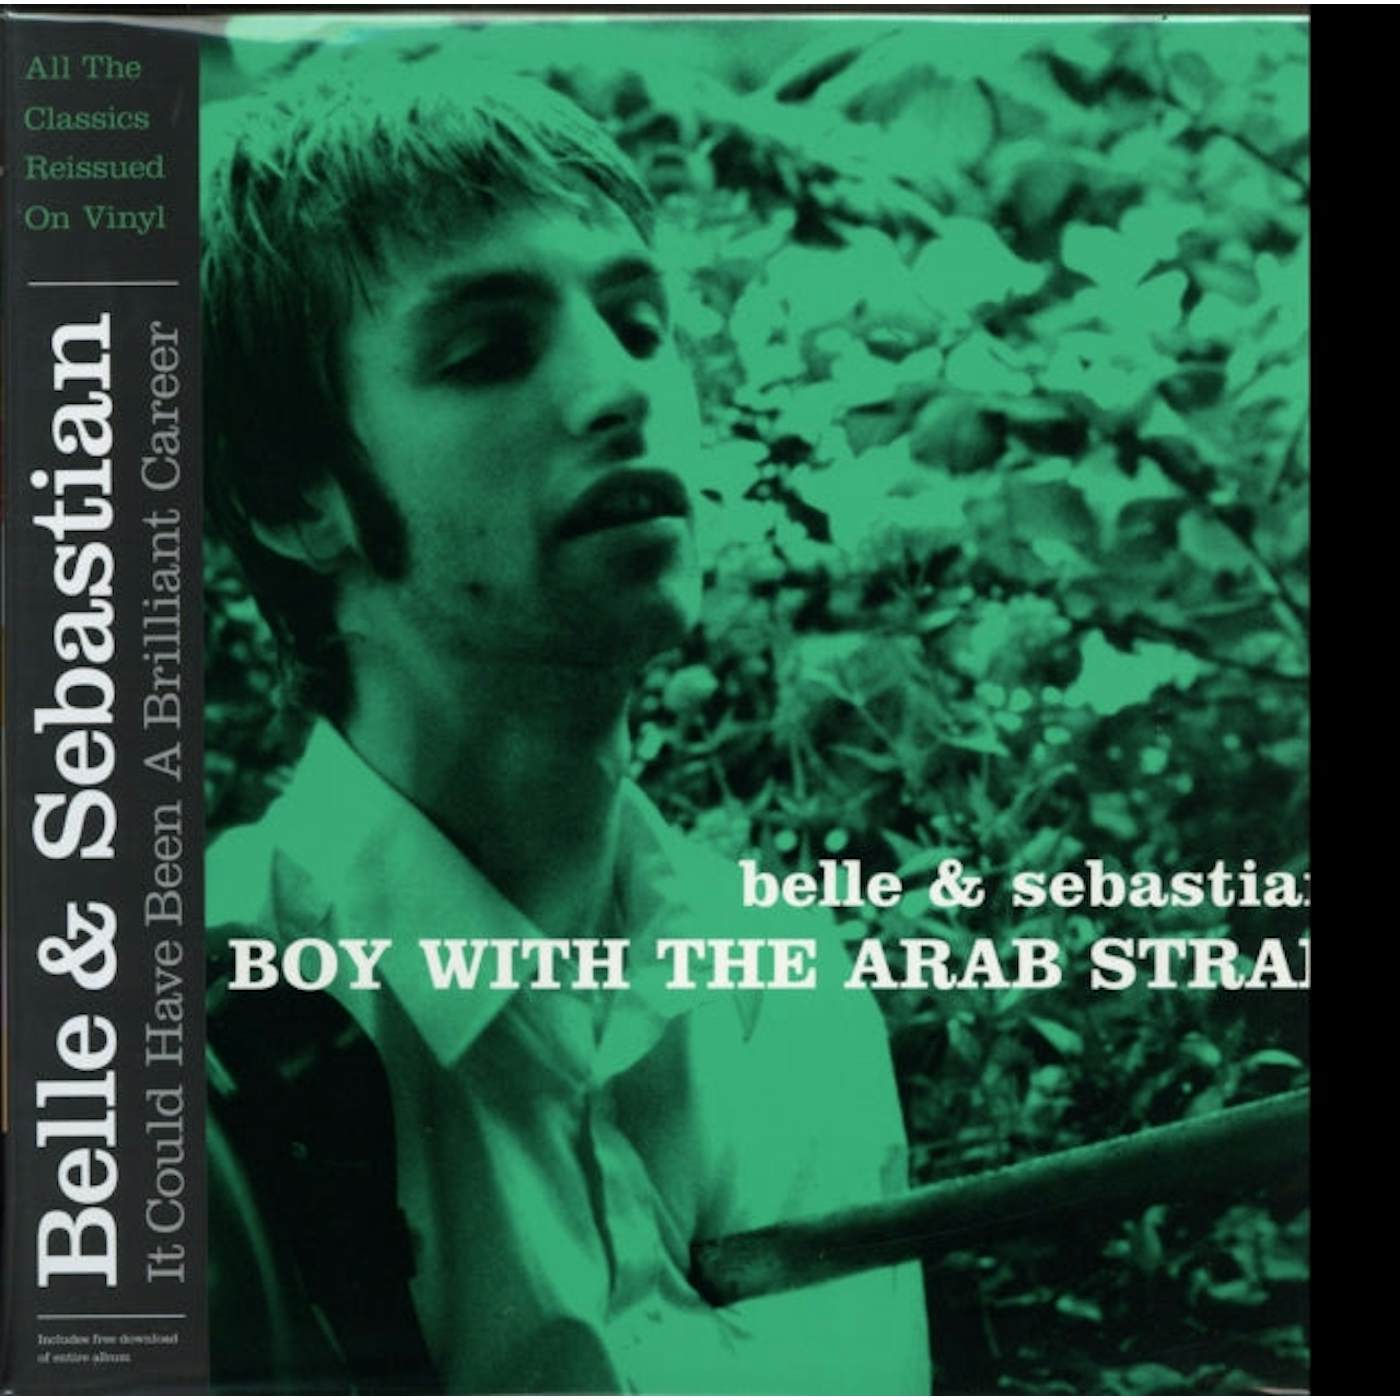 Belle and Sebastian LP Vinyl Record - The Boy With The Arab Strap